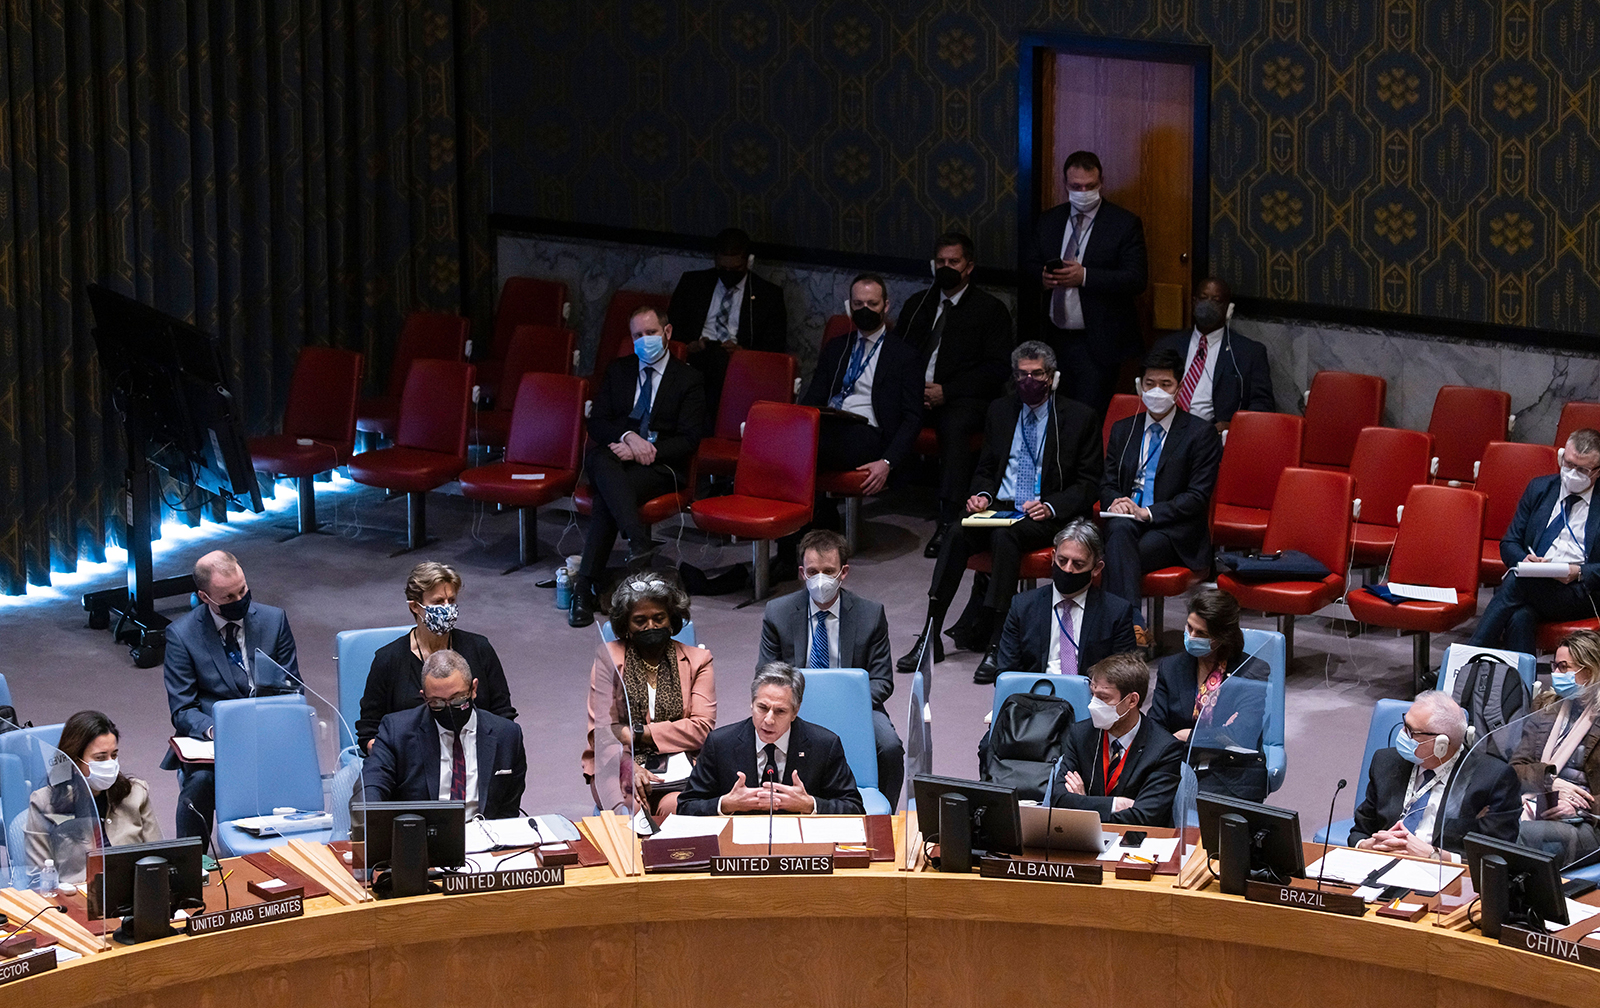 US Secretary of State Antony Blinken addresses a UN Security Council meeting at the UN headquarters in New York, on February 17.